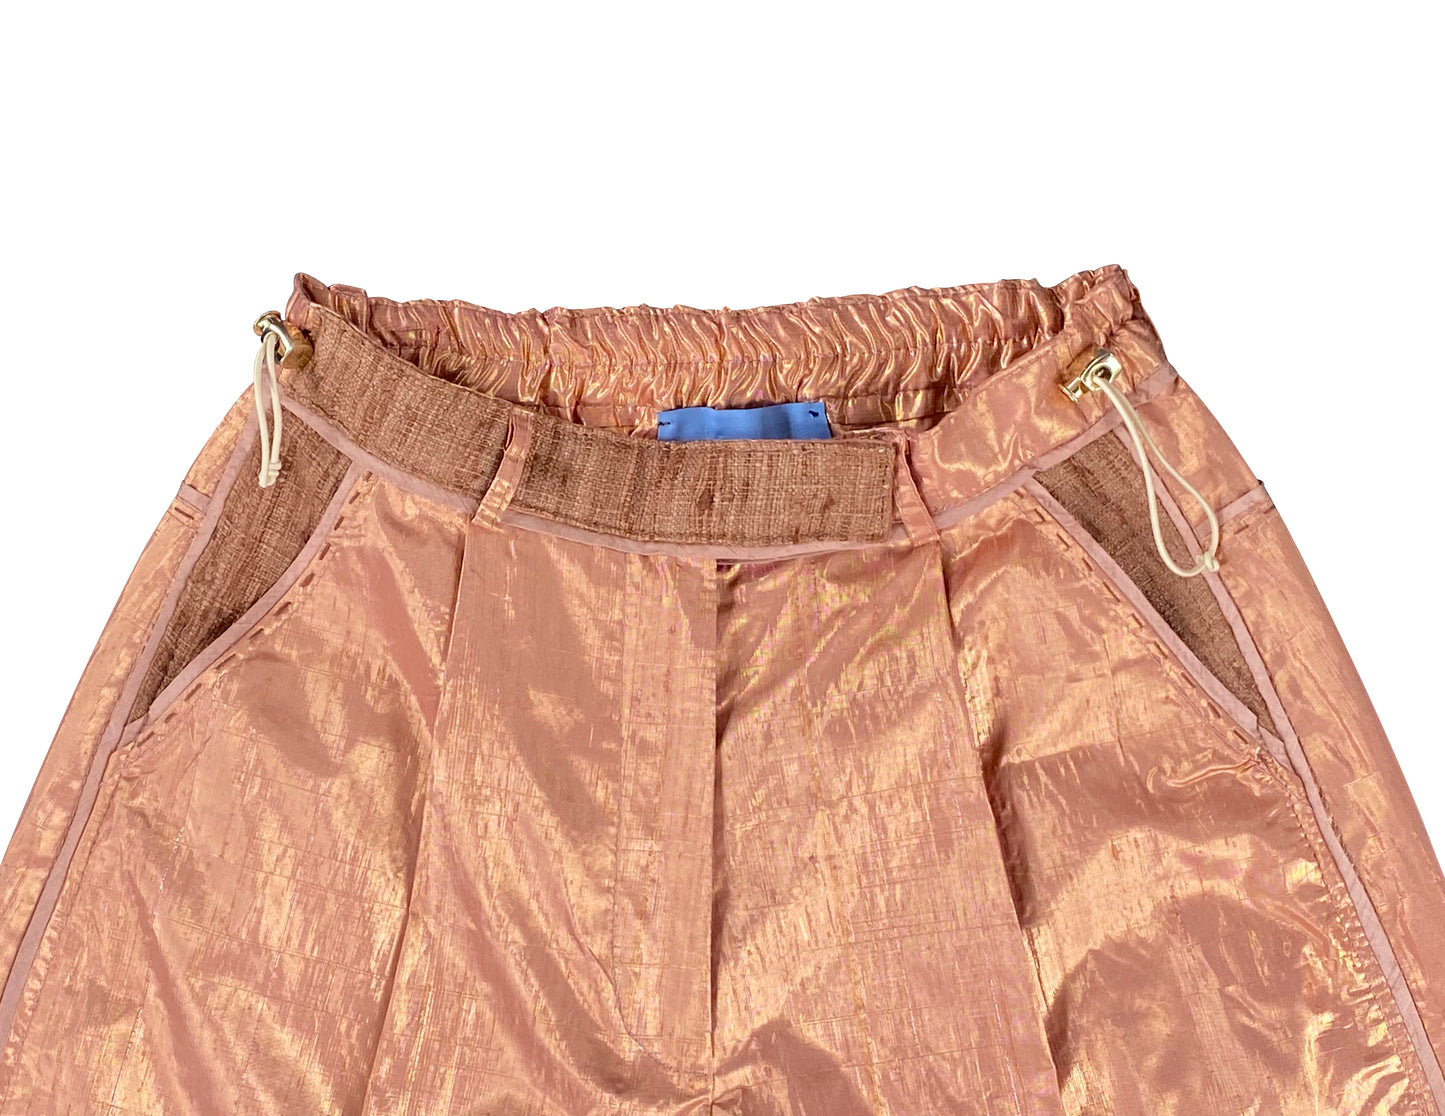 Copper Mothership Disc Arched-Leg Pants in Deadstock Silk Lame